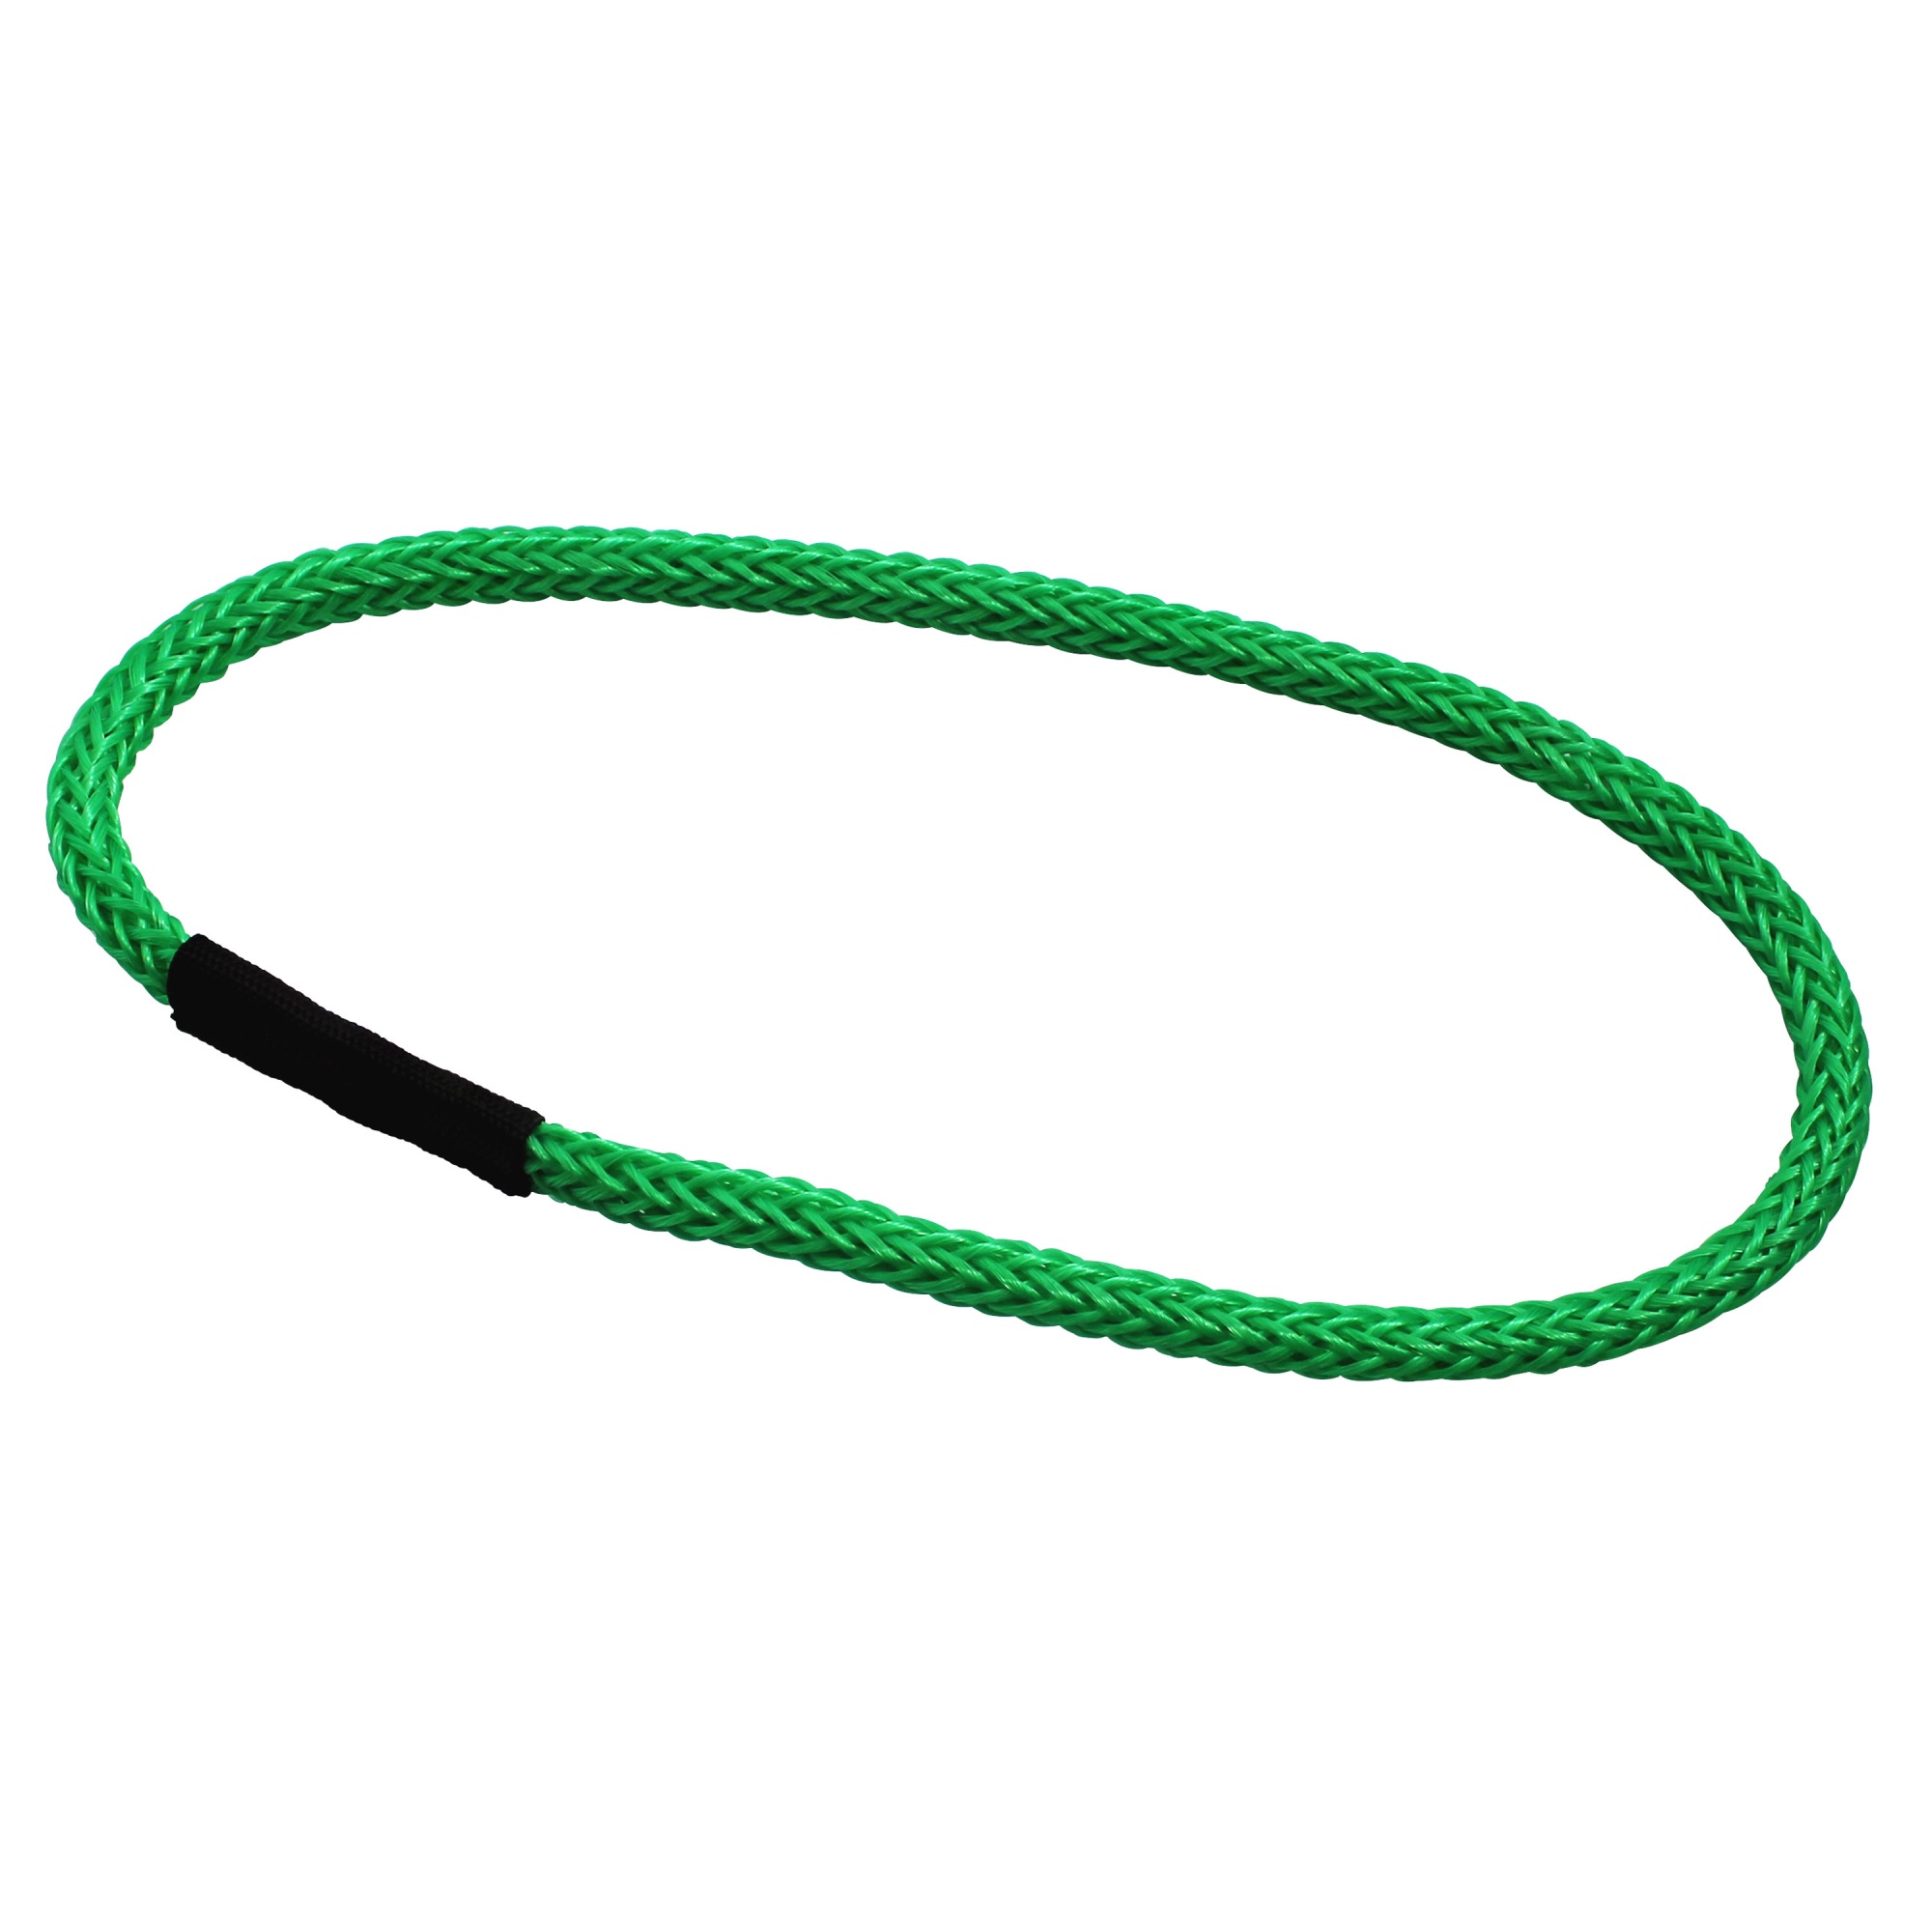 Extreme Max 3006.3178 BoatTector Bungee Dock Line Extension Loop - 1', Green (Value 4-Pack)